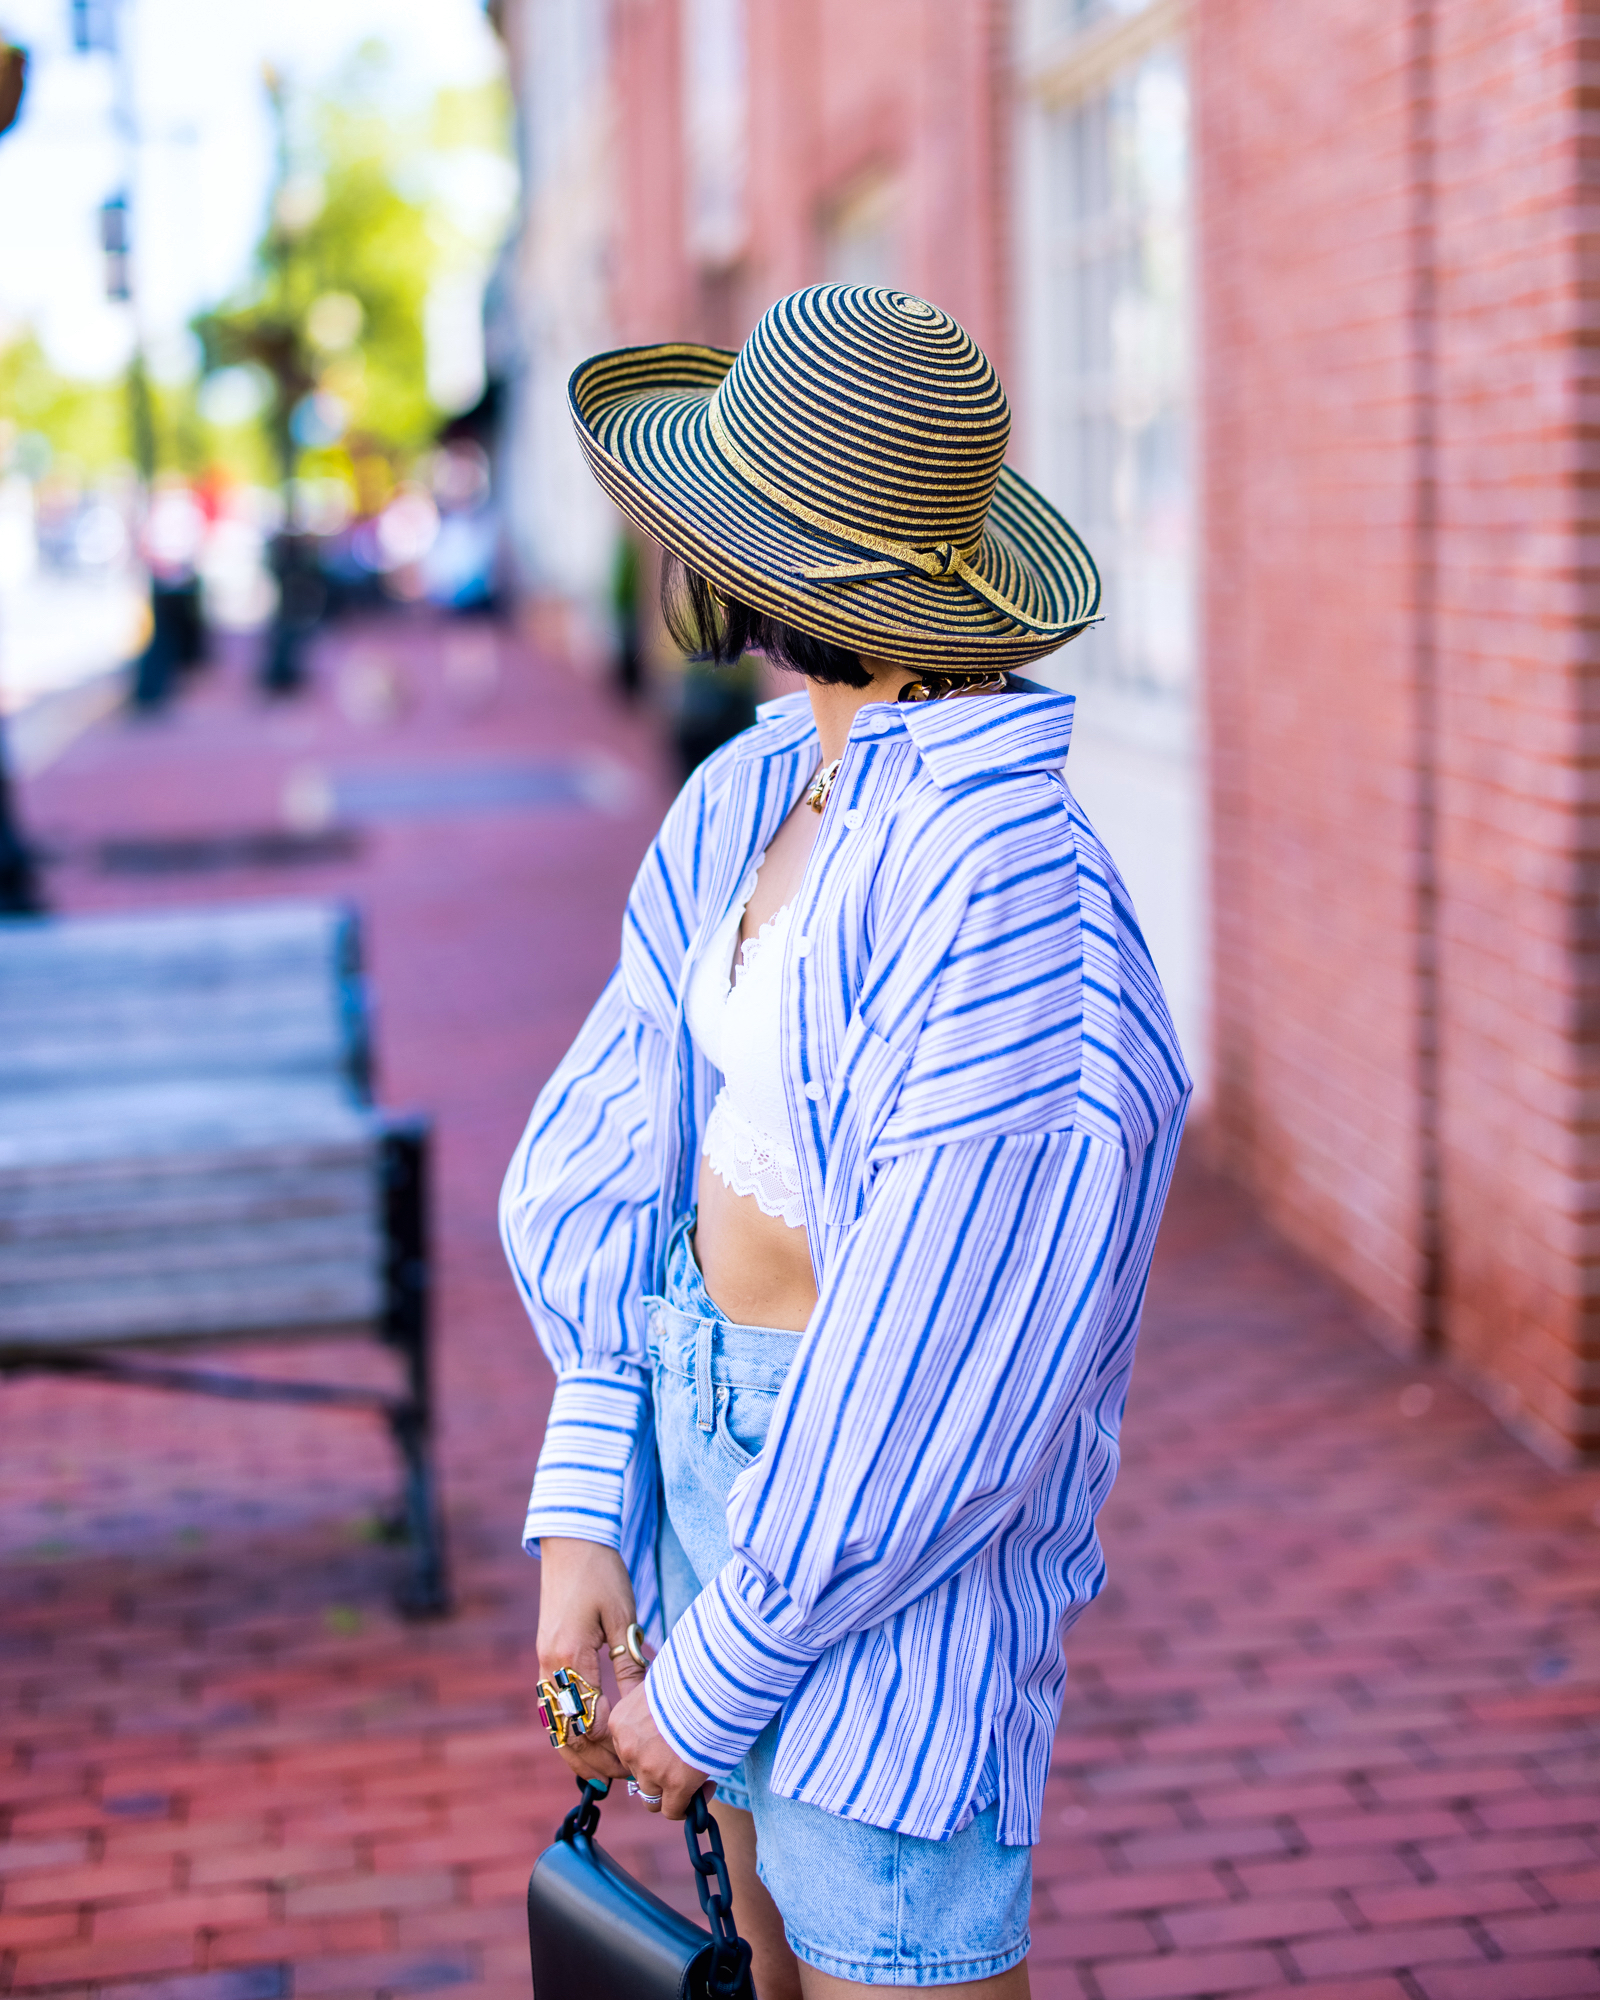 nanphanita jacob is showing the back of the stripe straw sunhat by san diego hat company and wandering at red bank new jersey